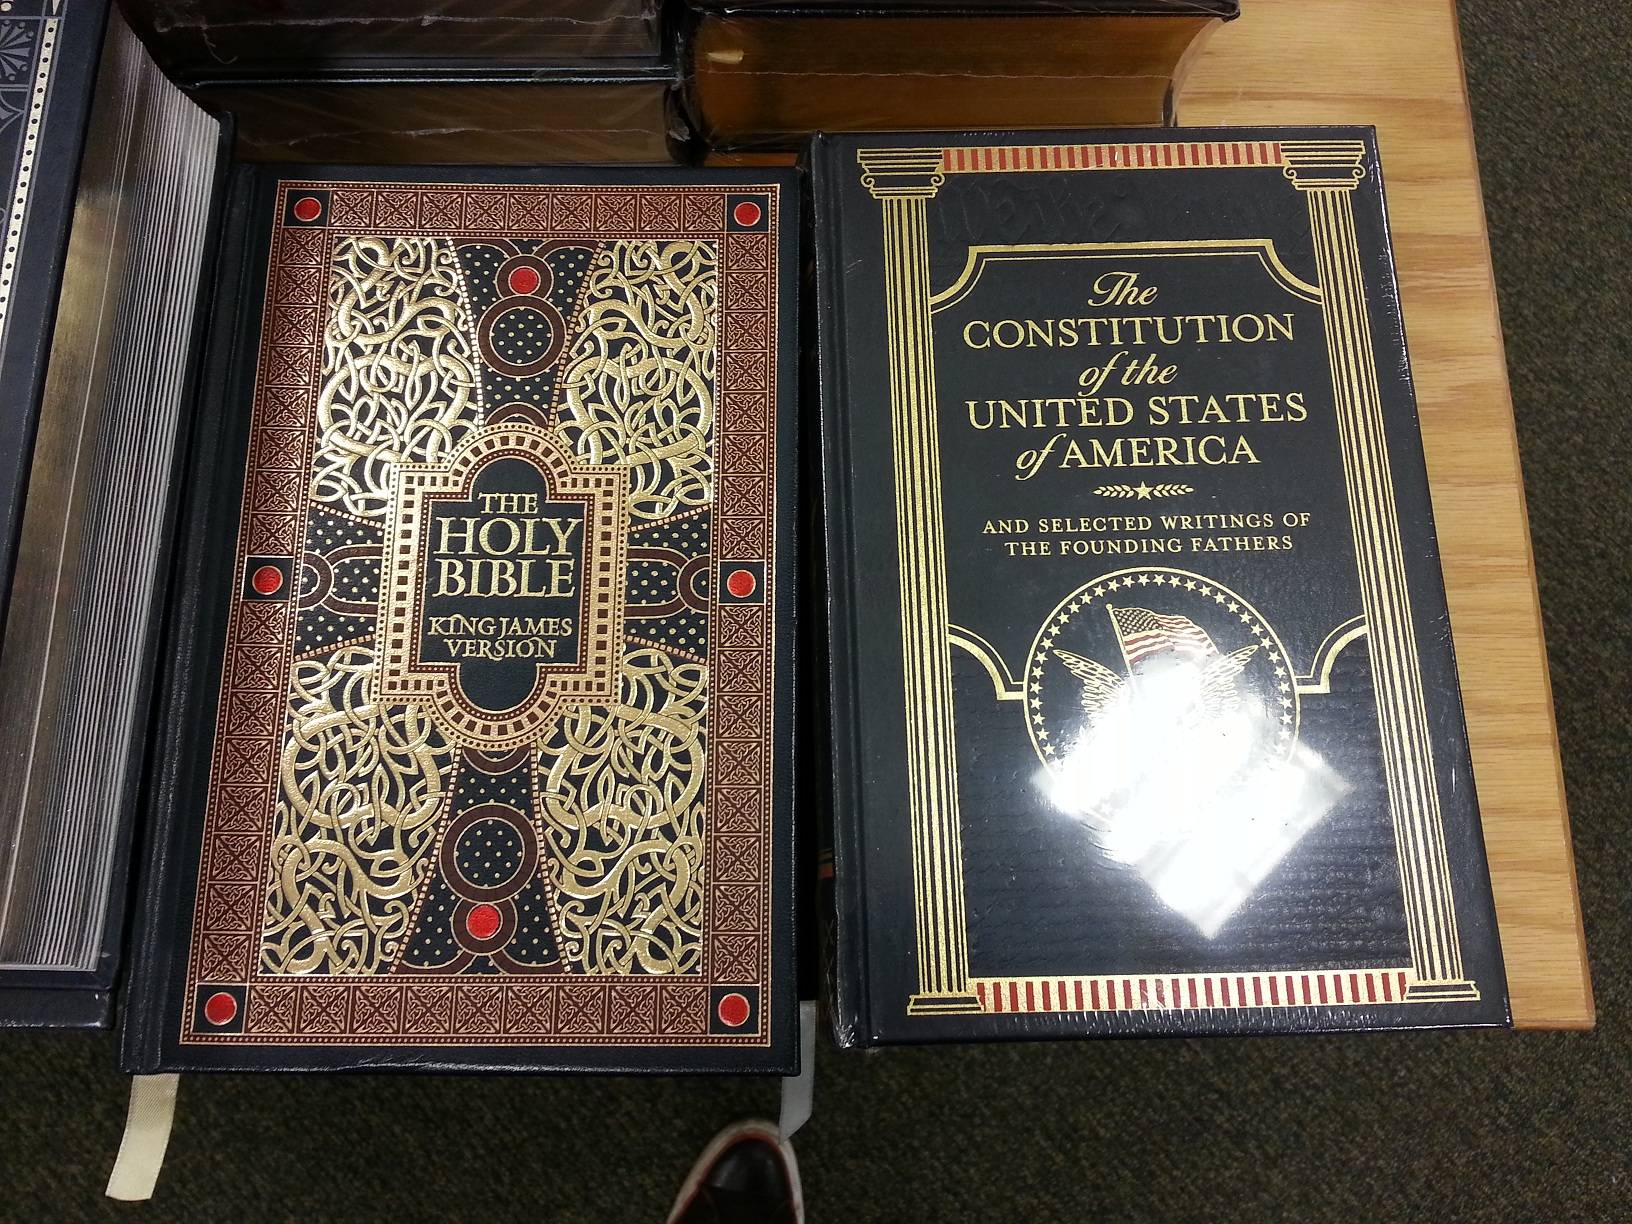 These two books should never be this close together...